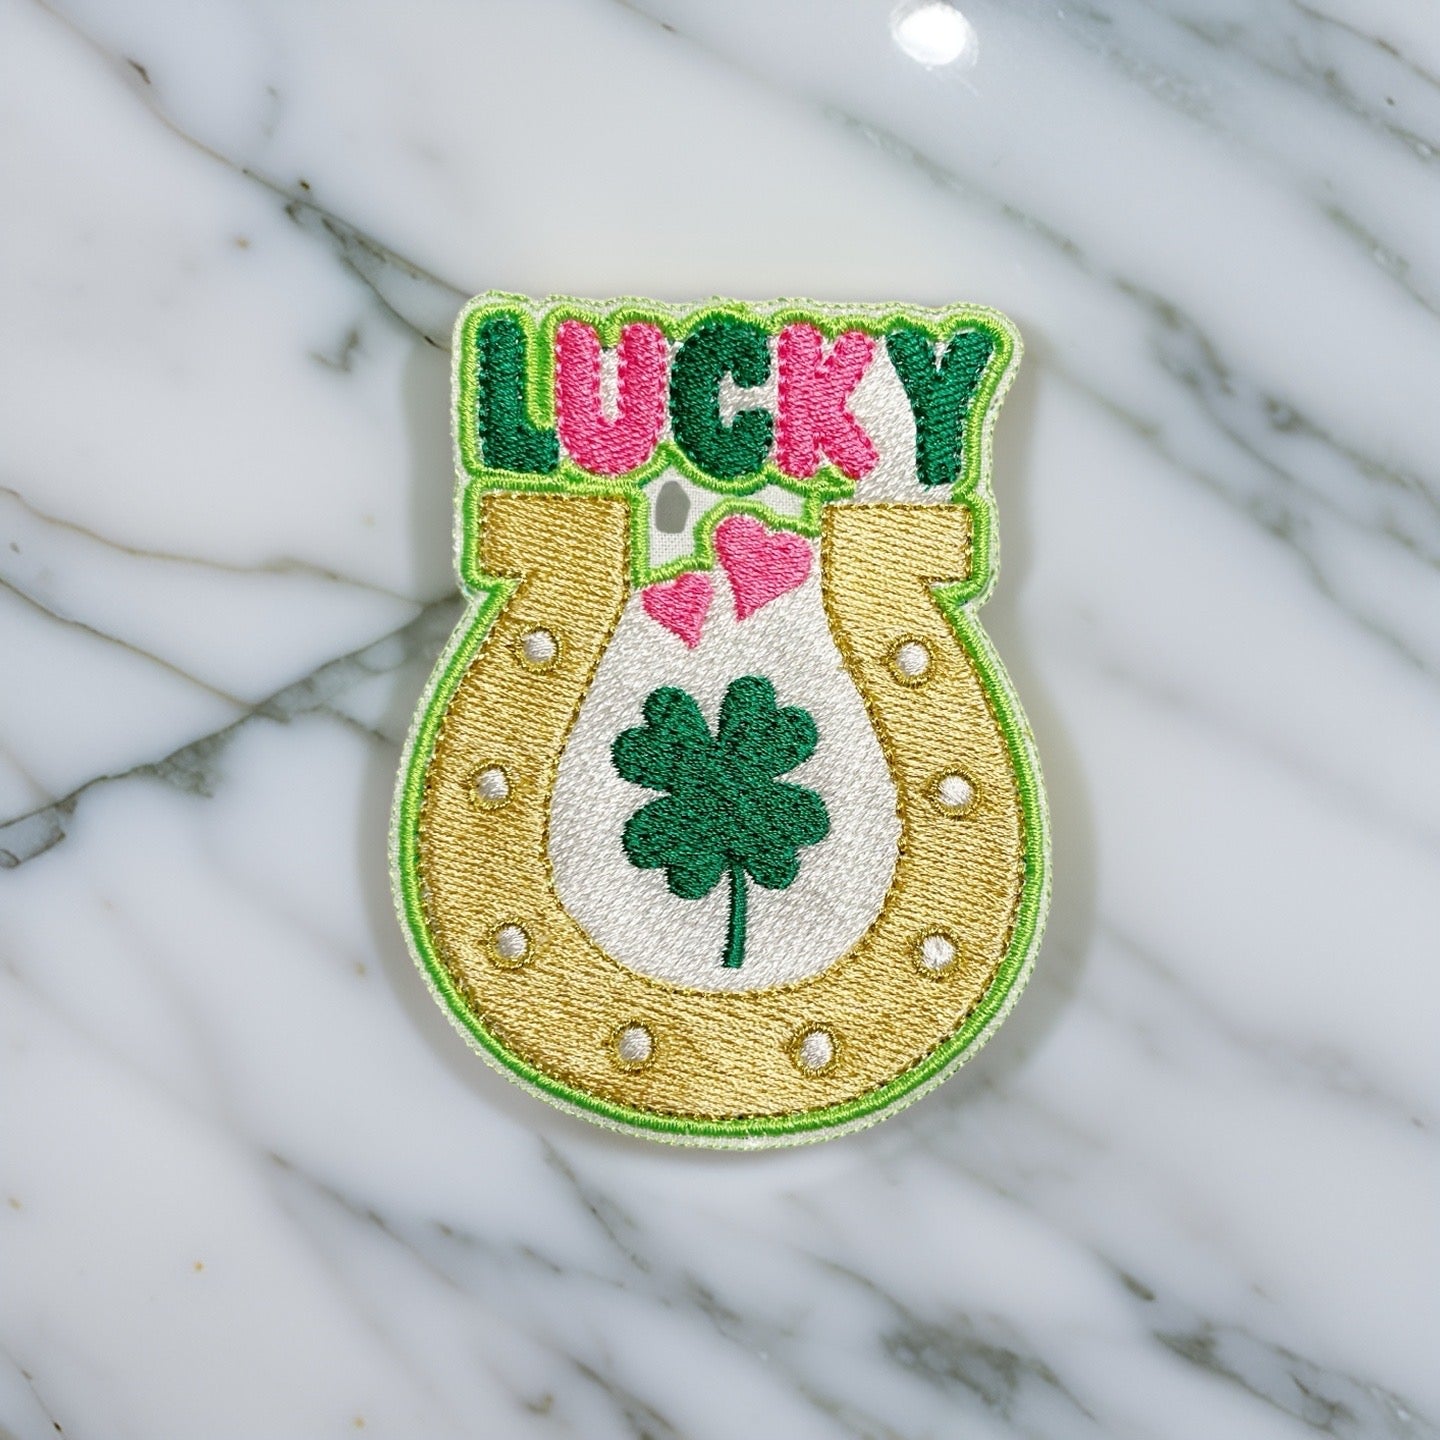 Lucky You - Handcrafted Lucky Horse Shoe Patch, Iron-On or Sew-On, Large Size